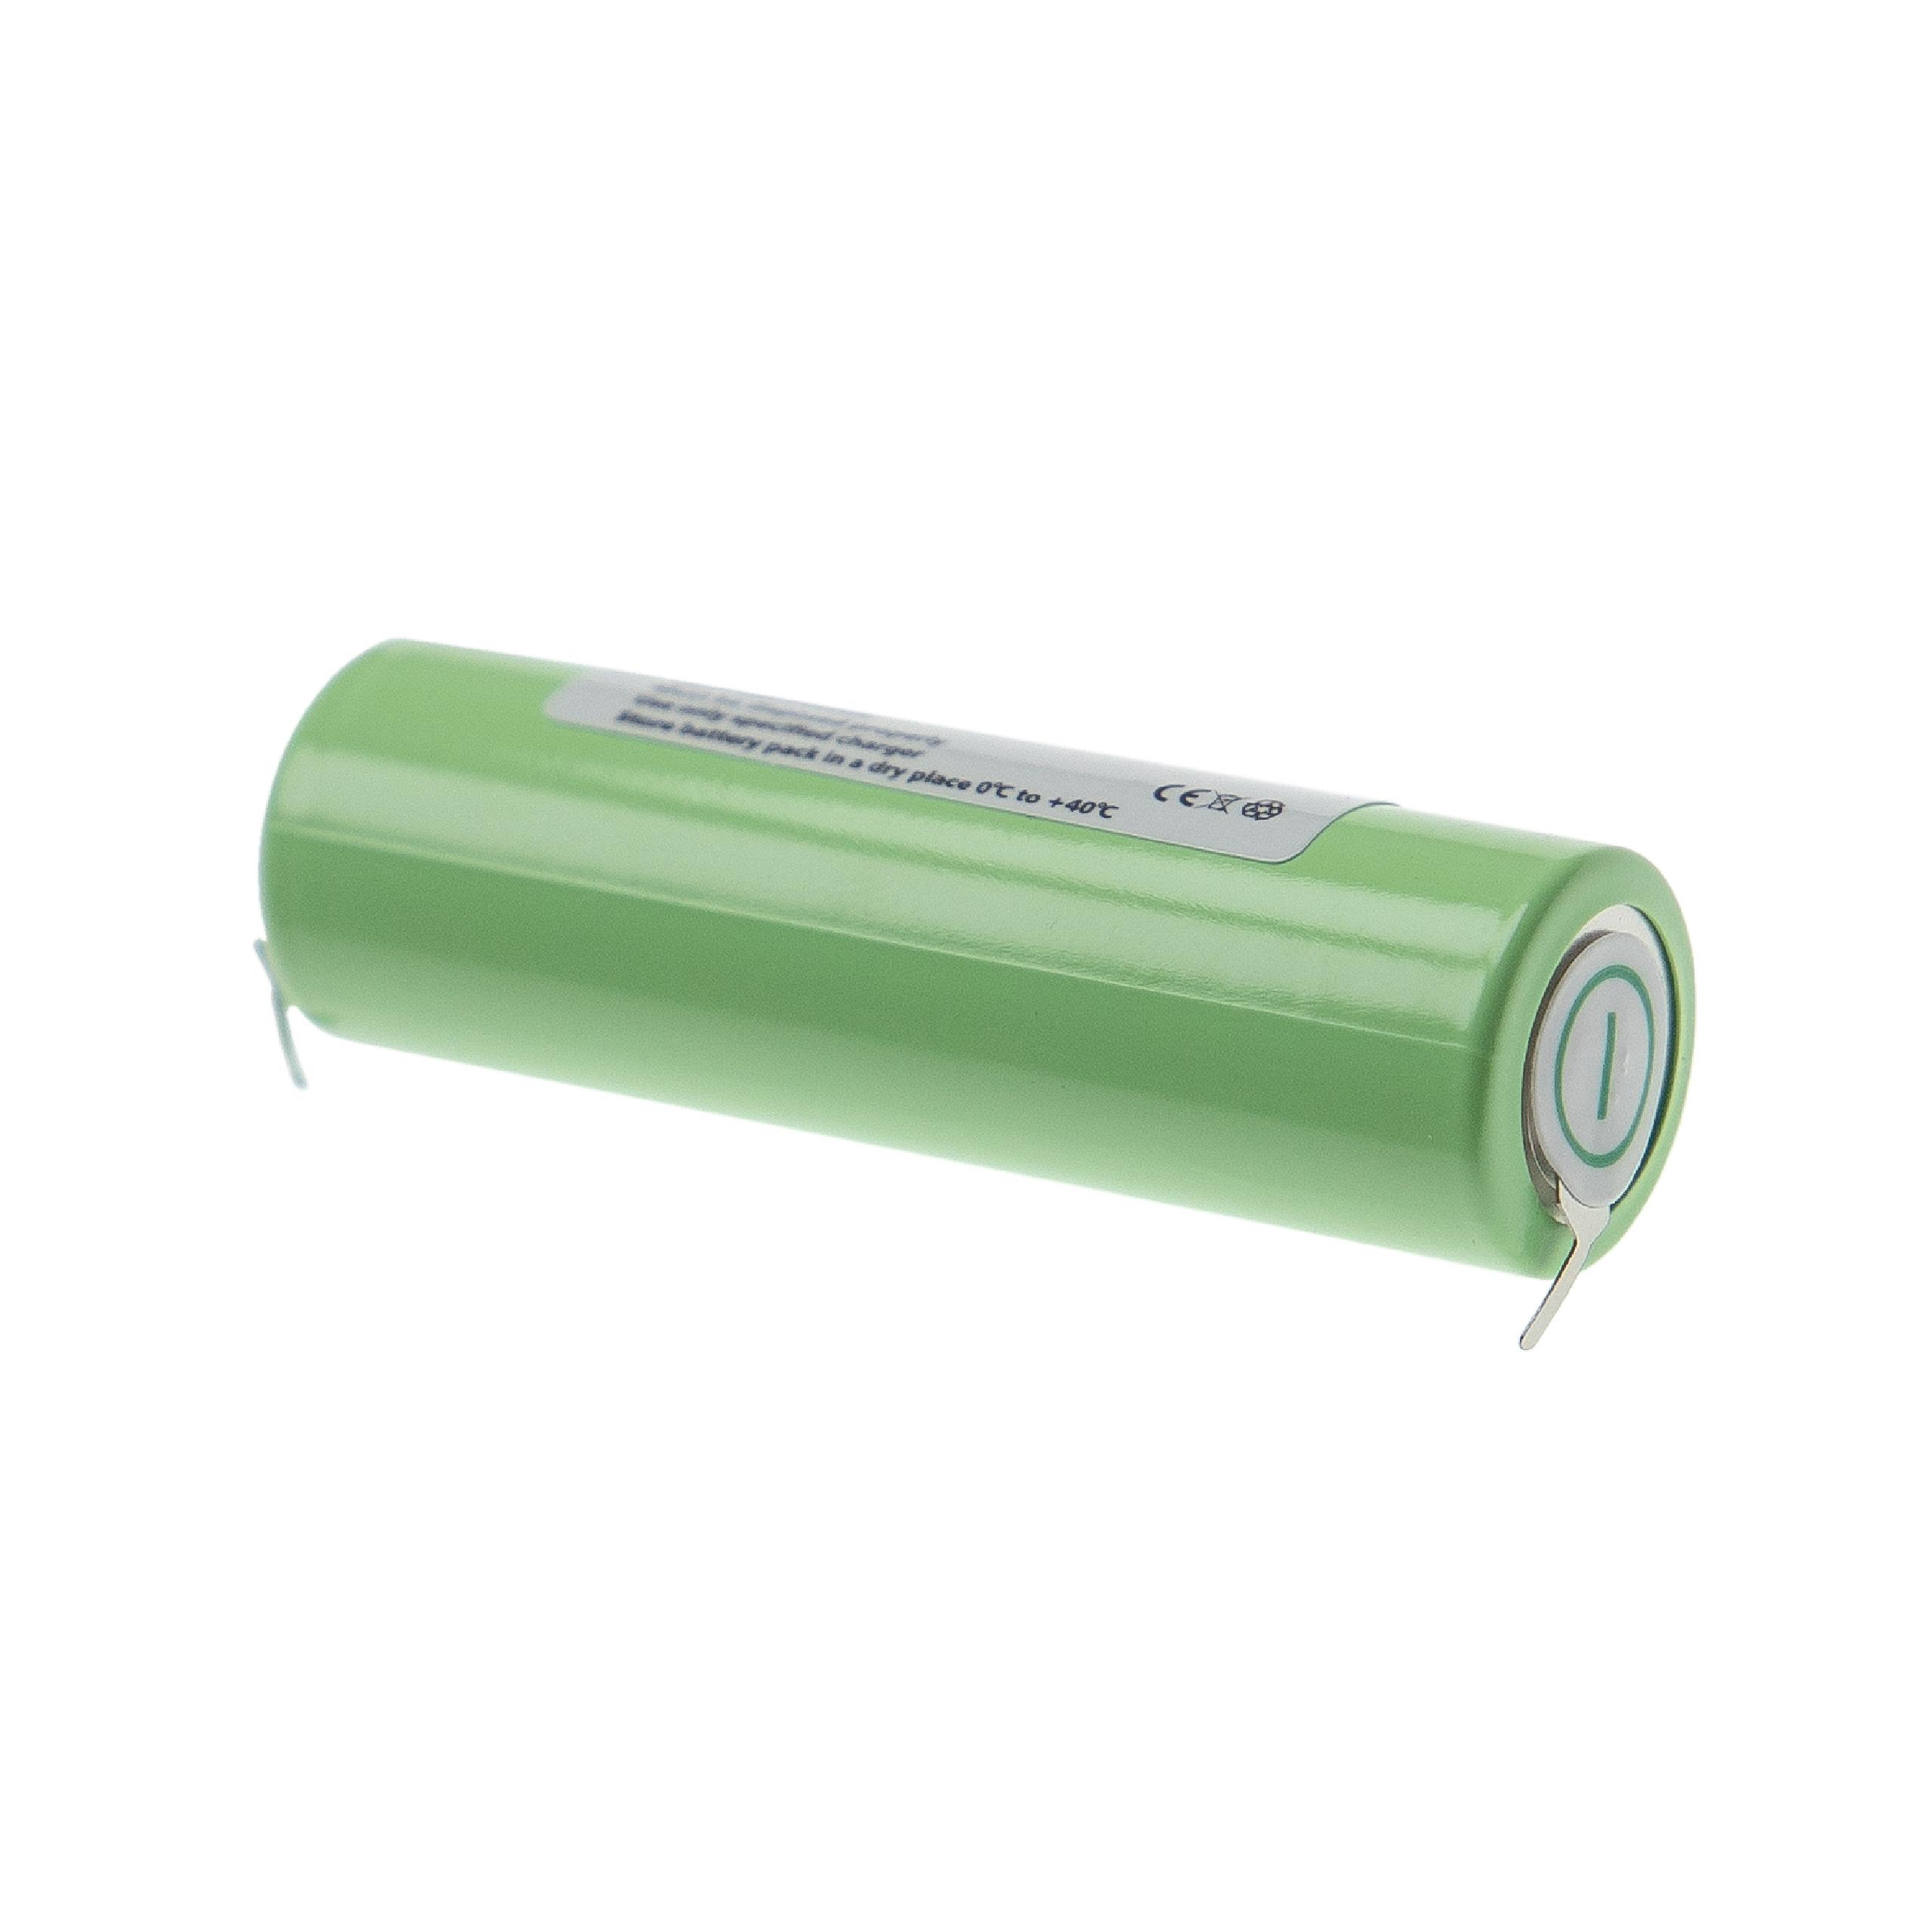 Electric Razor Battery Replacement for Braun Typ 4510, Typ 4515, Typ 5601 - 2500mAh 1.2V NiMH